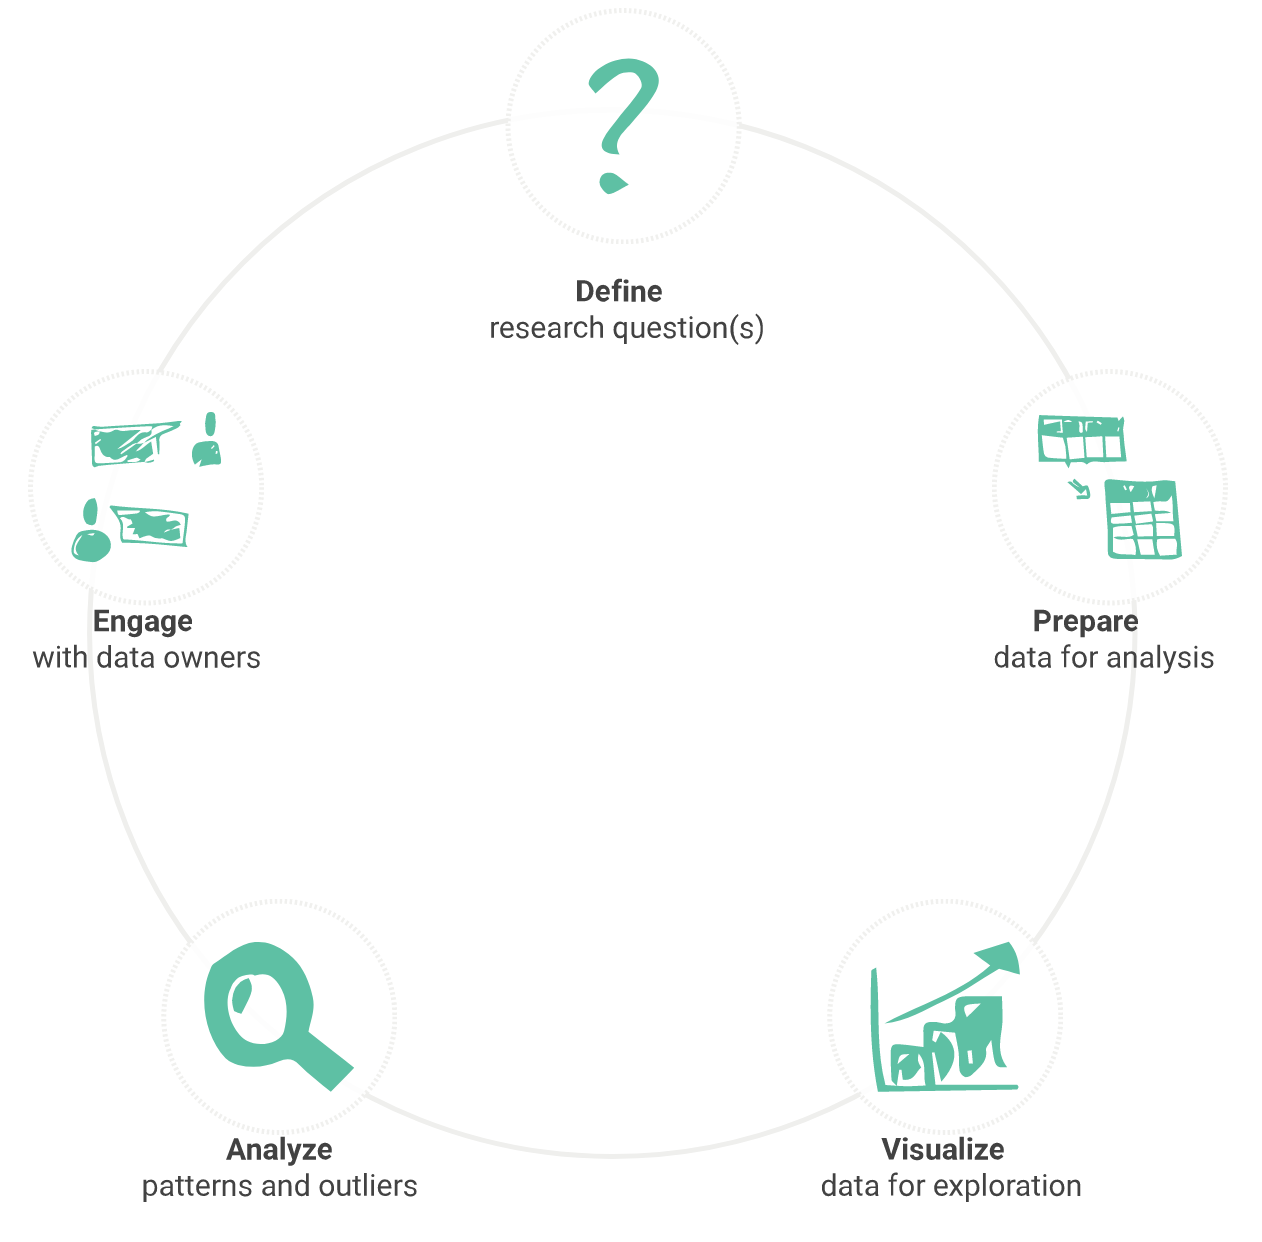 Steps Taken for Research, starting with defining the research question, preparing data for analysis, visualizing the data for exploration, analyzing the data for patterns and outliers, and finally engaging with data owners